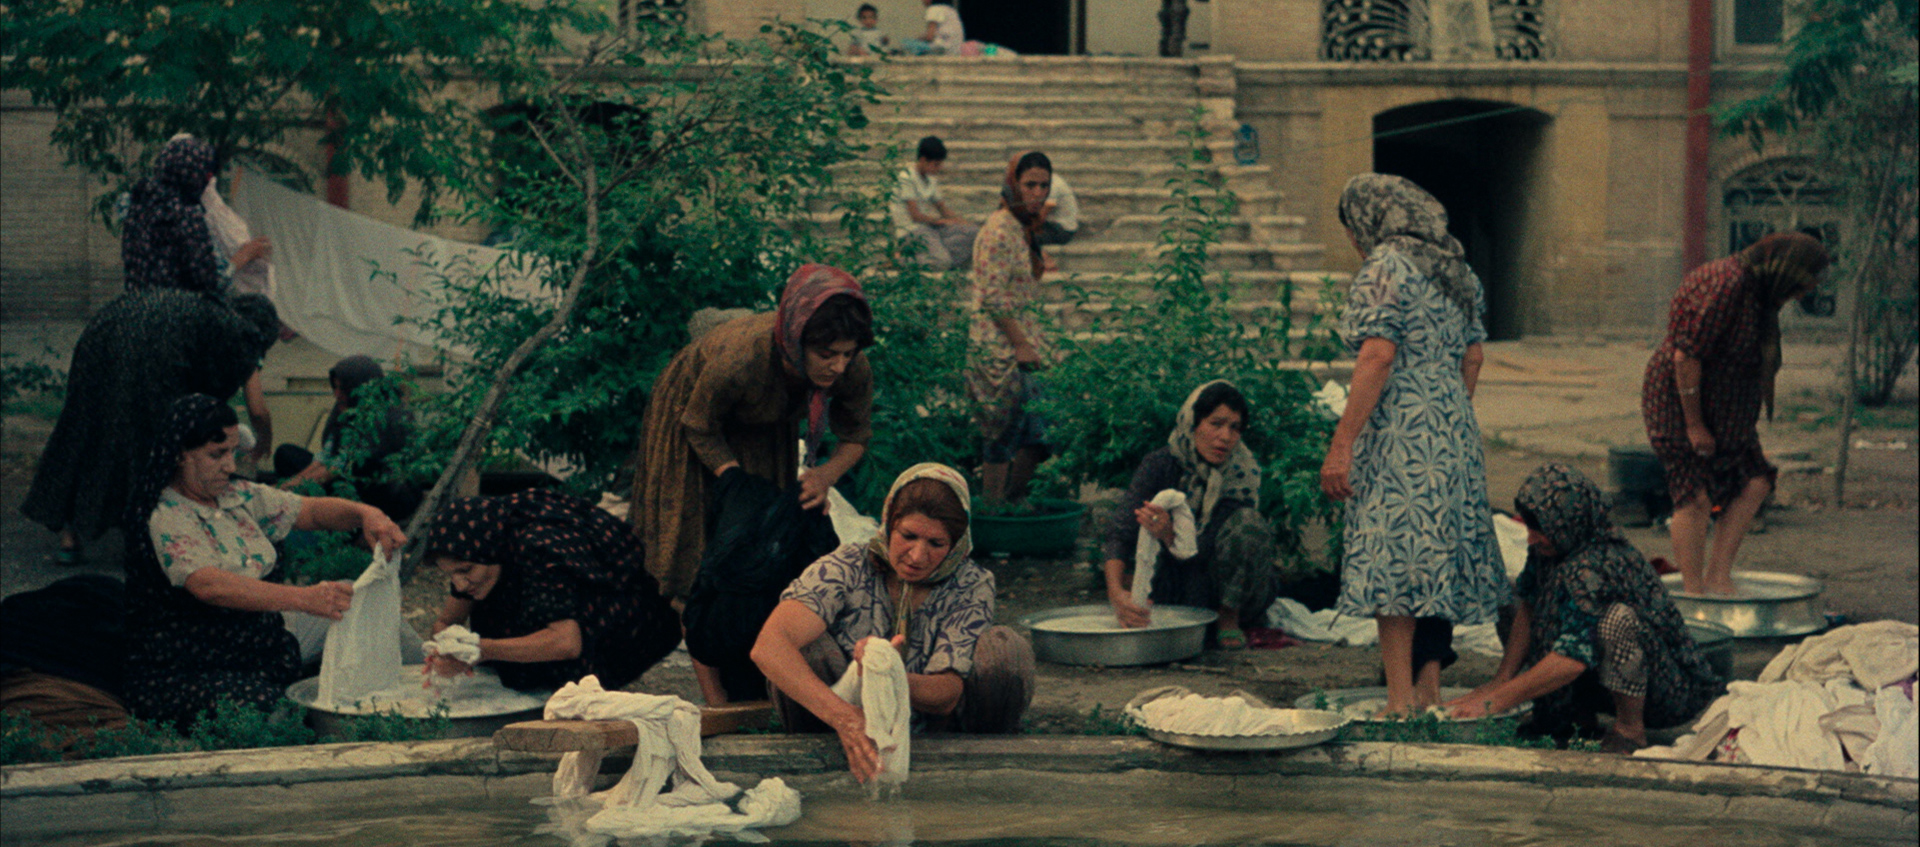 An image of several people in a town square standing around a fountain washing clothes and congregating